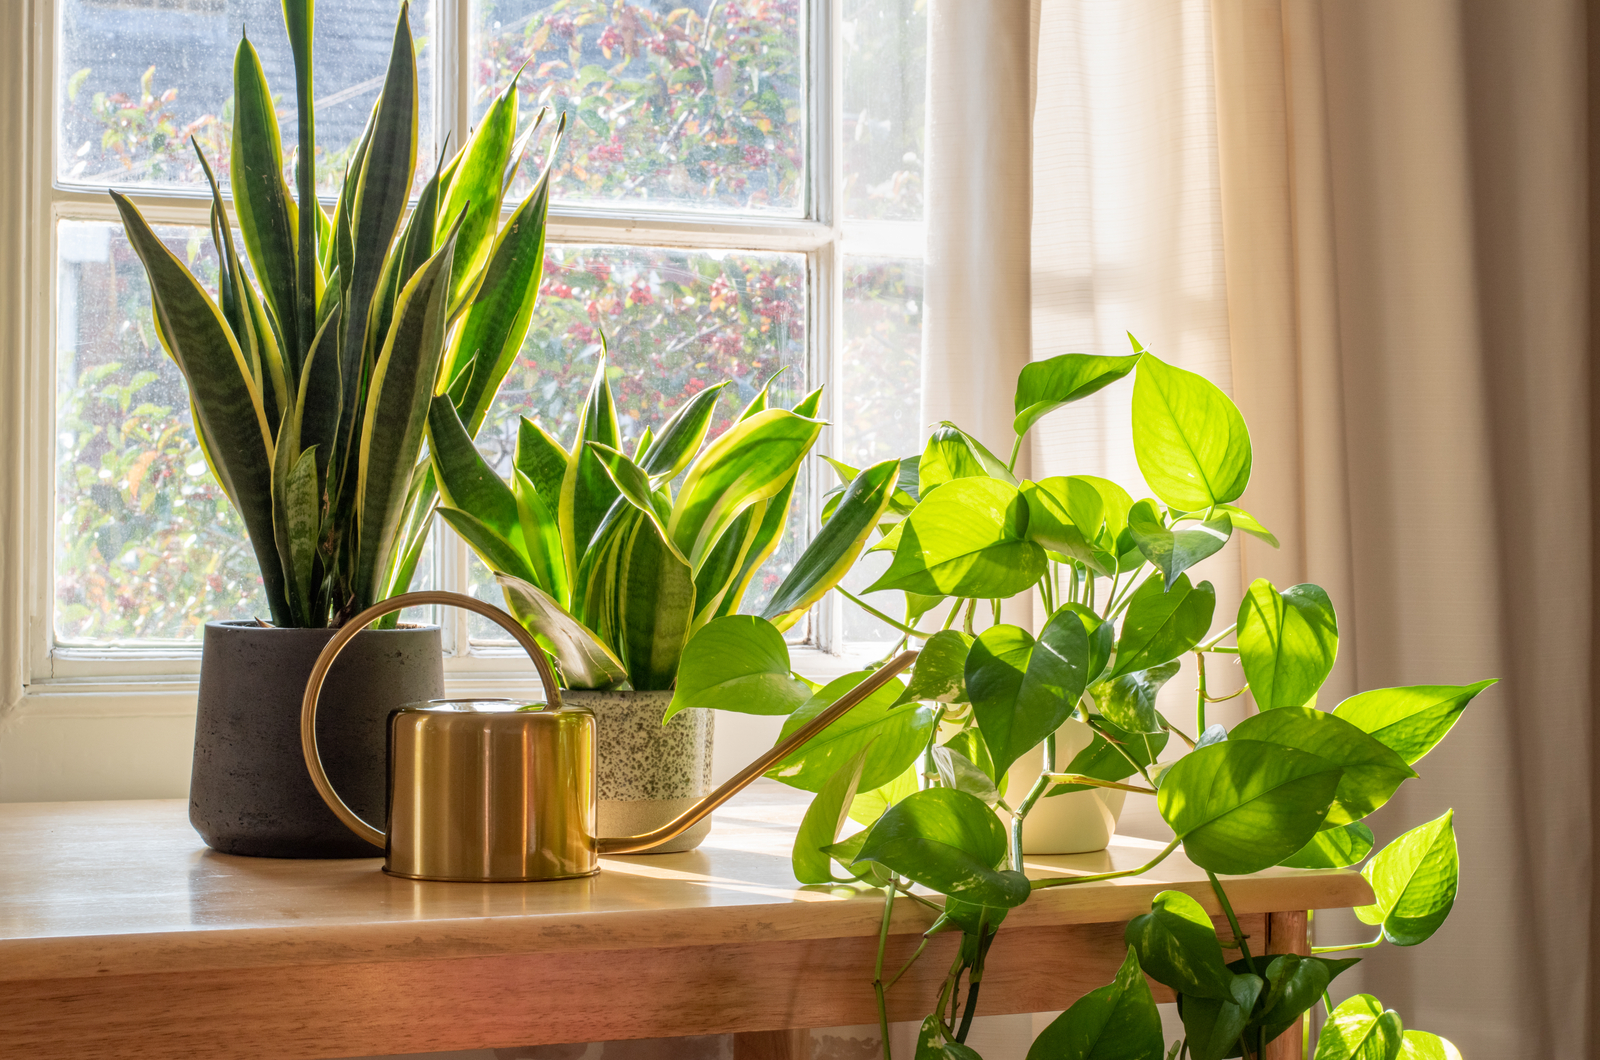 house plants in the sun light by the window